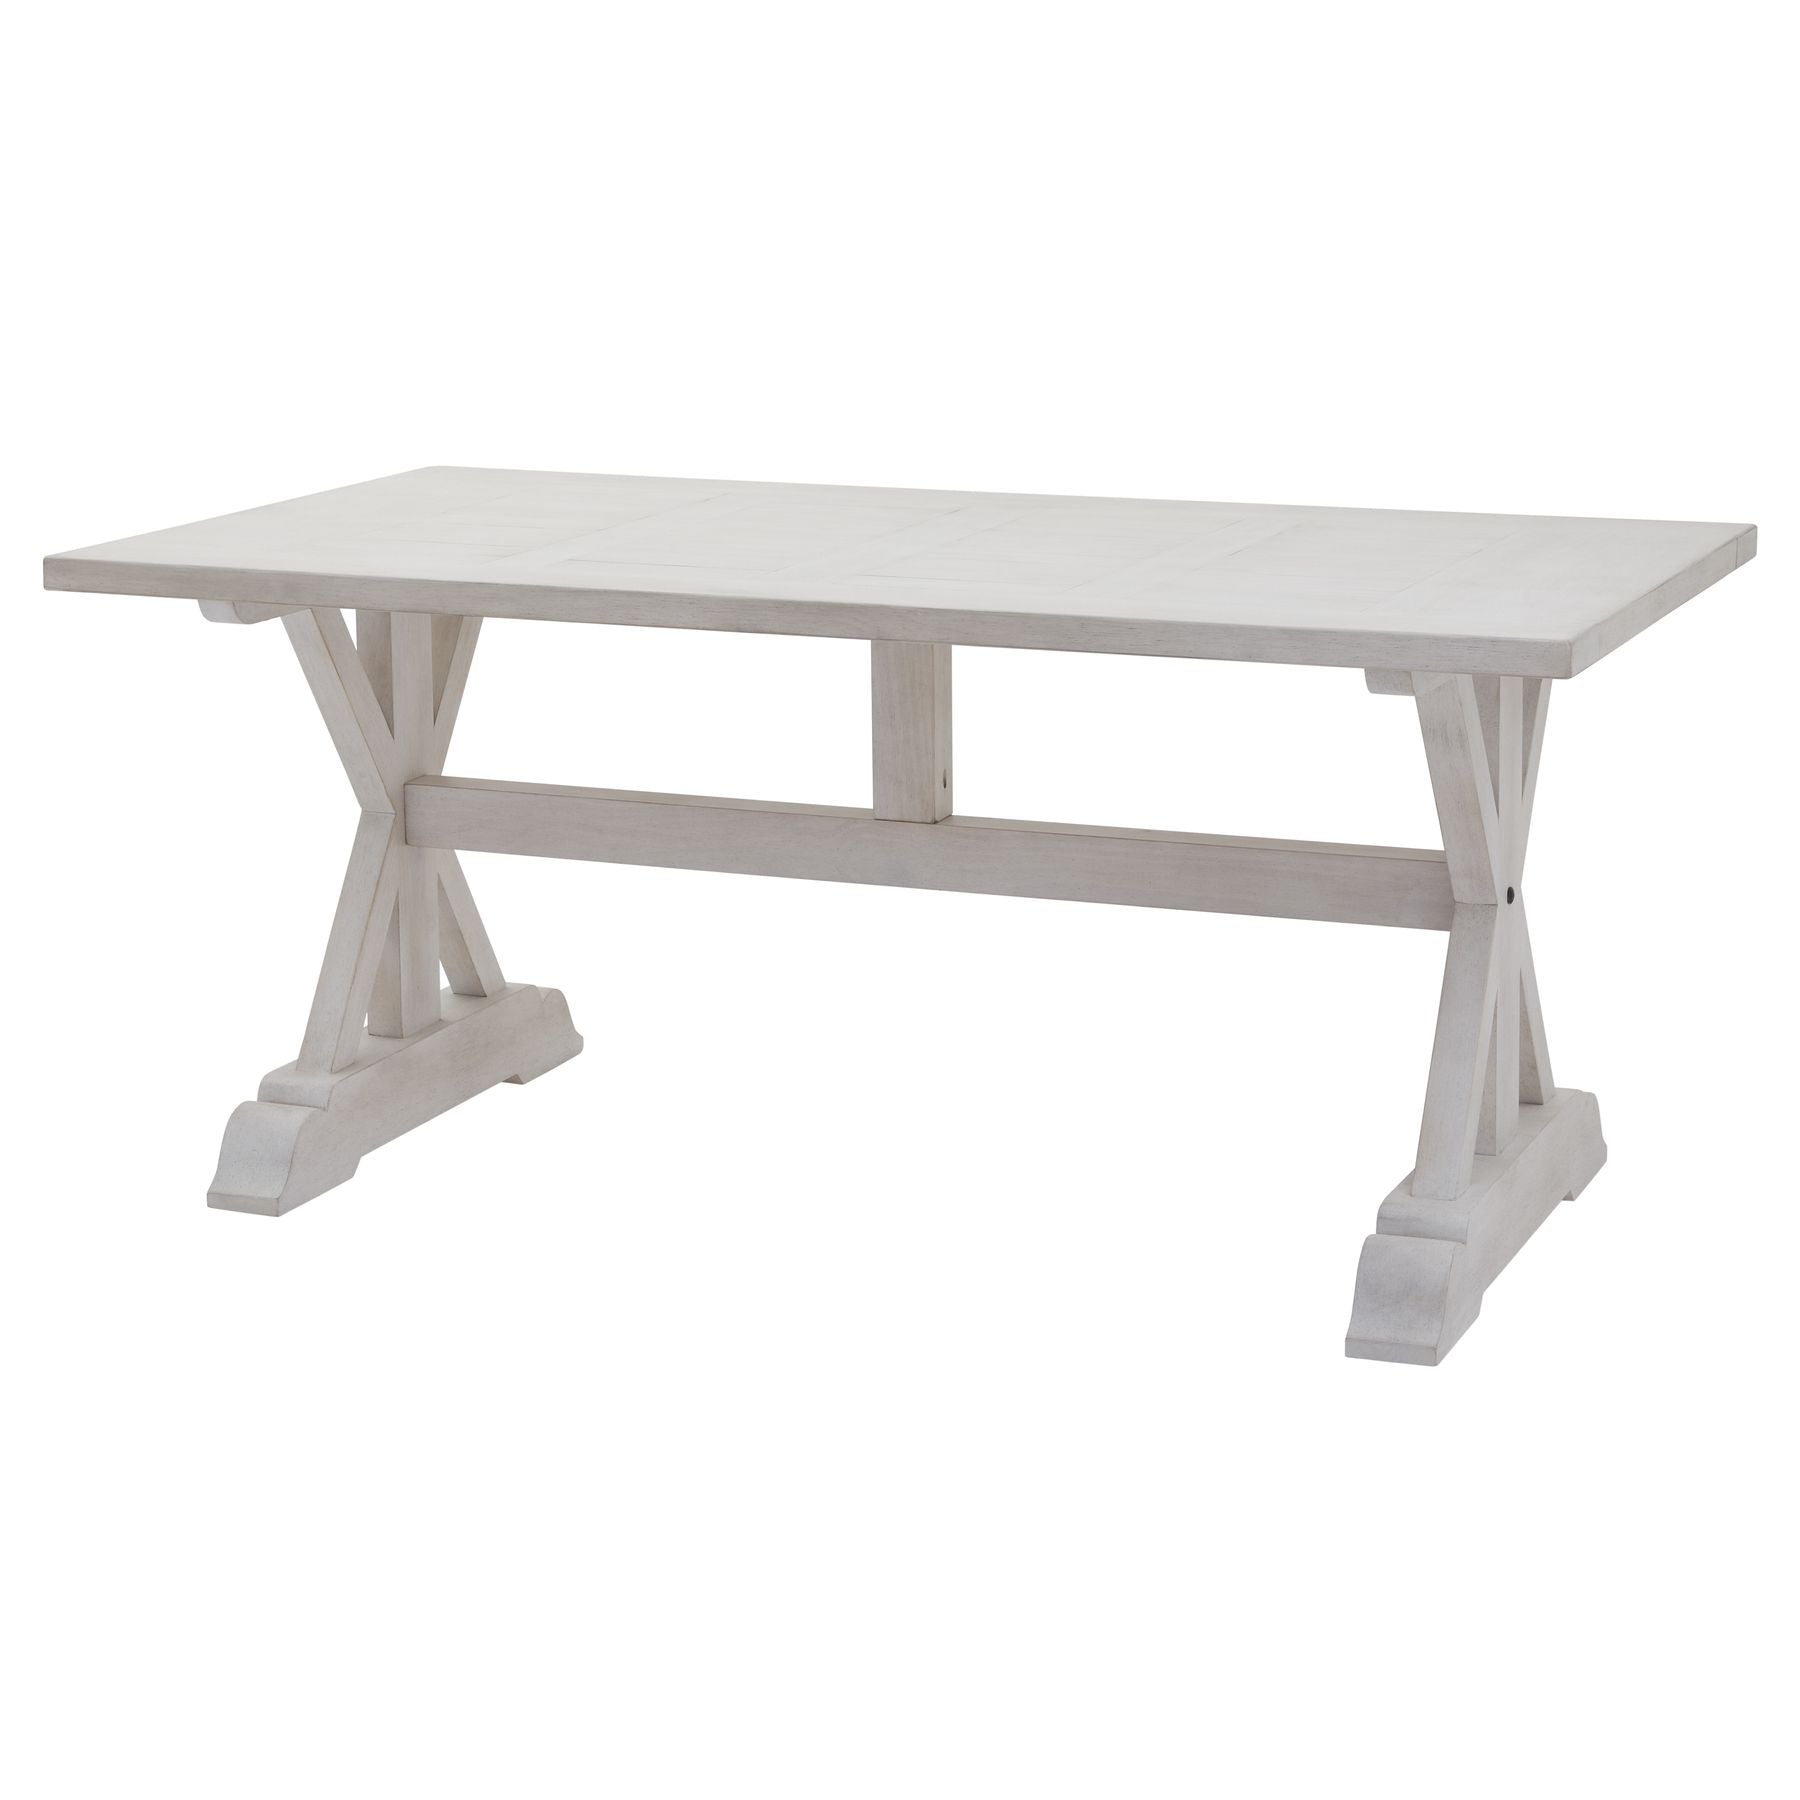 View Stamford Plank Collection Dining Table information